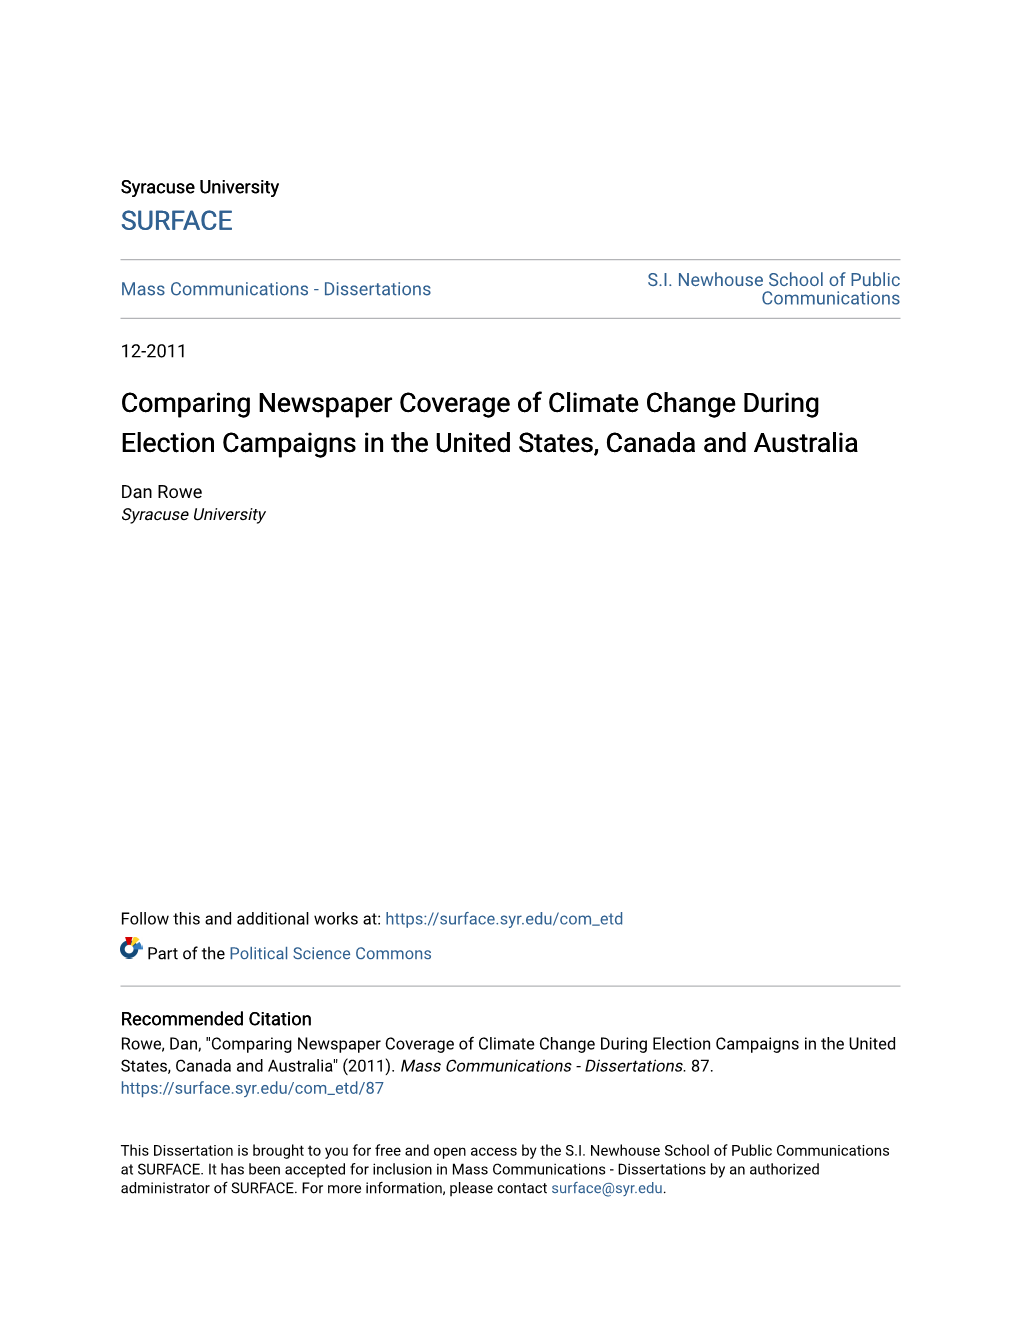 Comparing Newspaper Coverage of Climate Change During Election Campaigns in the United States, Canada and Australia